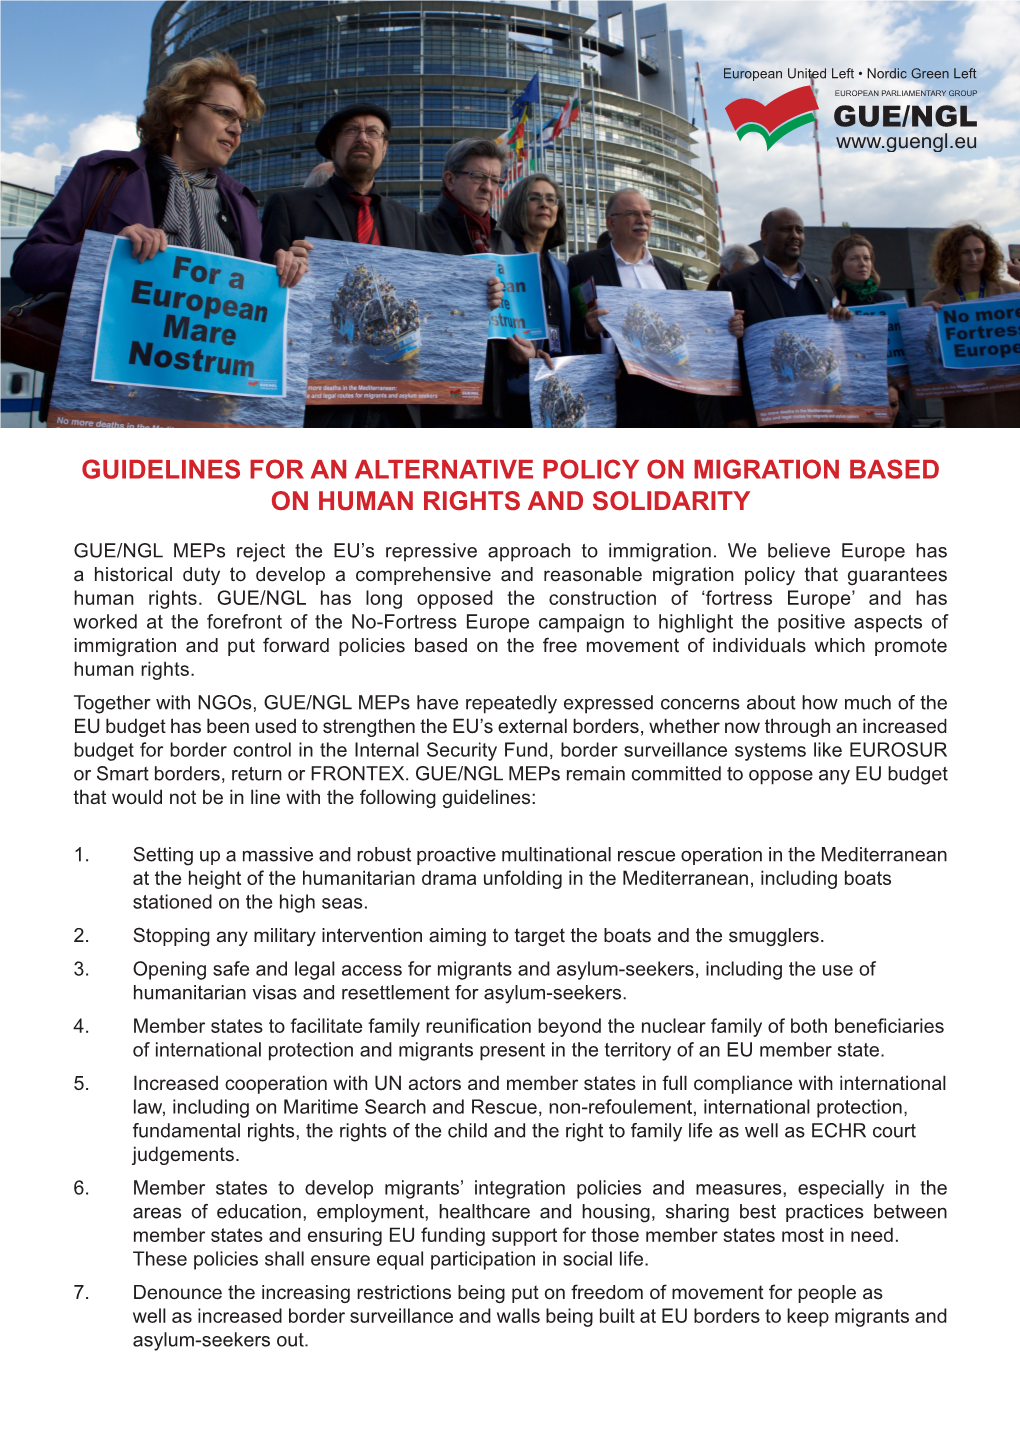 Guidelines for an Alternative Policy on Migration Based on Human Rights and Solidarity